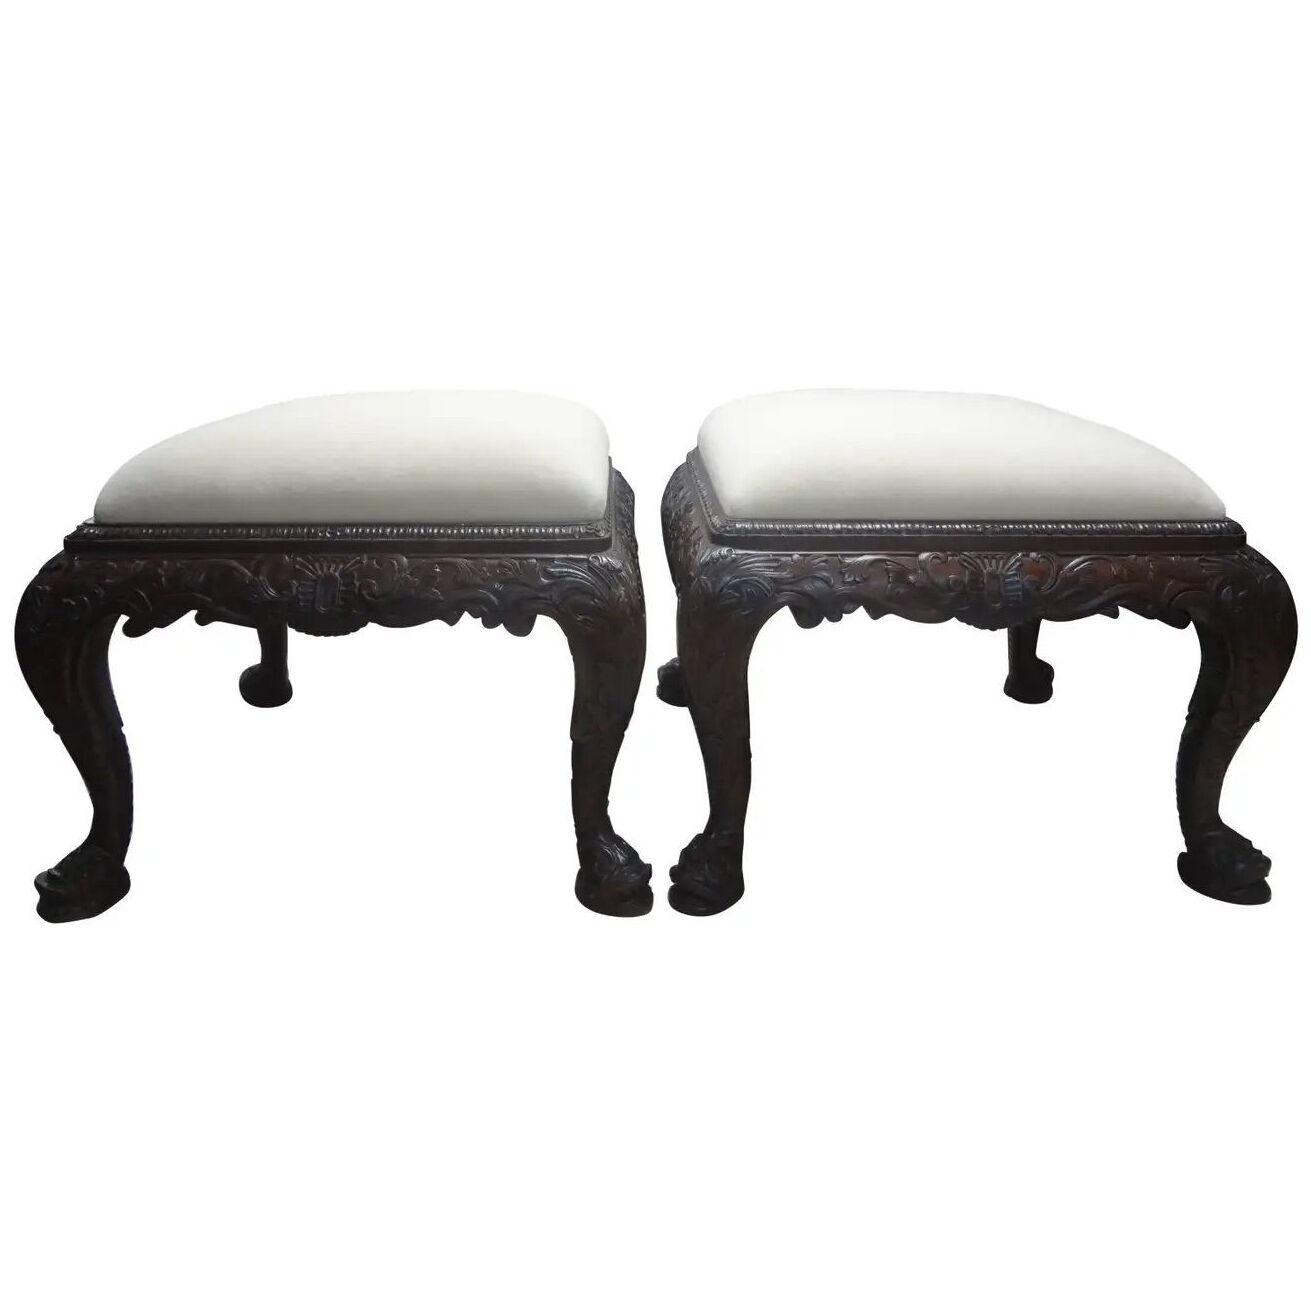 Pair of Large Scale Antique English Regency Style Ottomans with Dolphin Feet